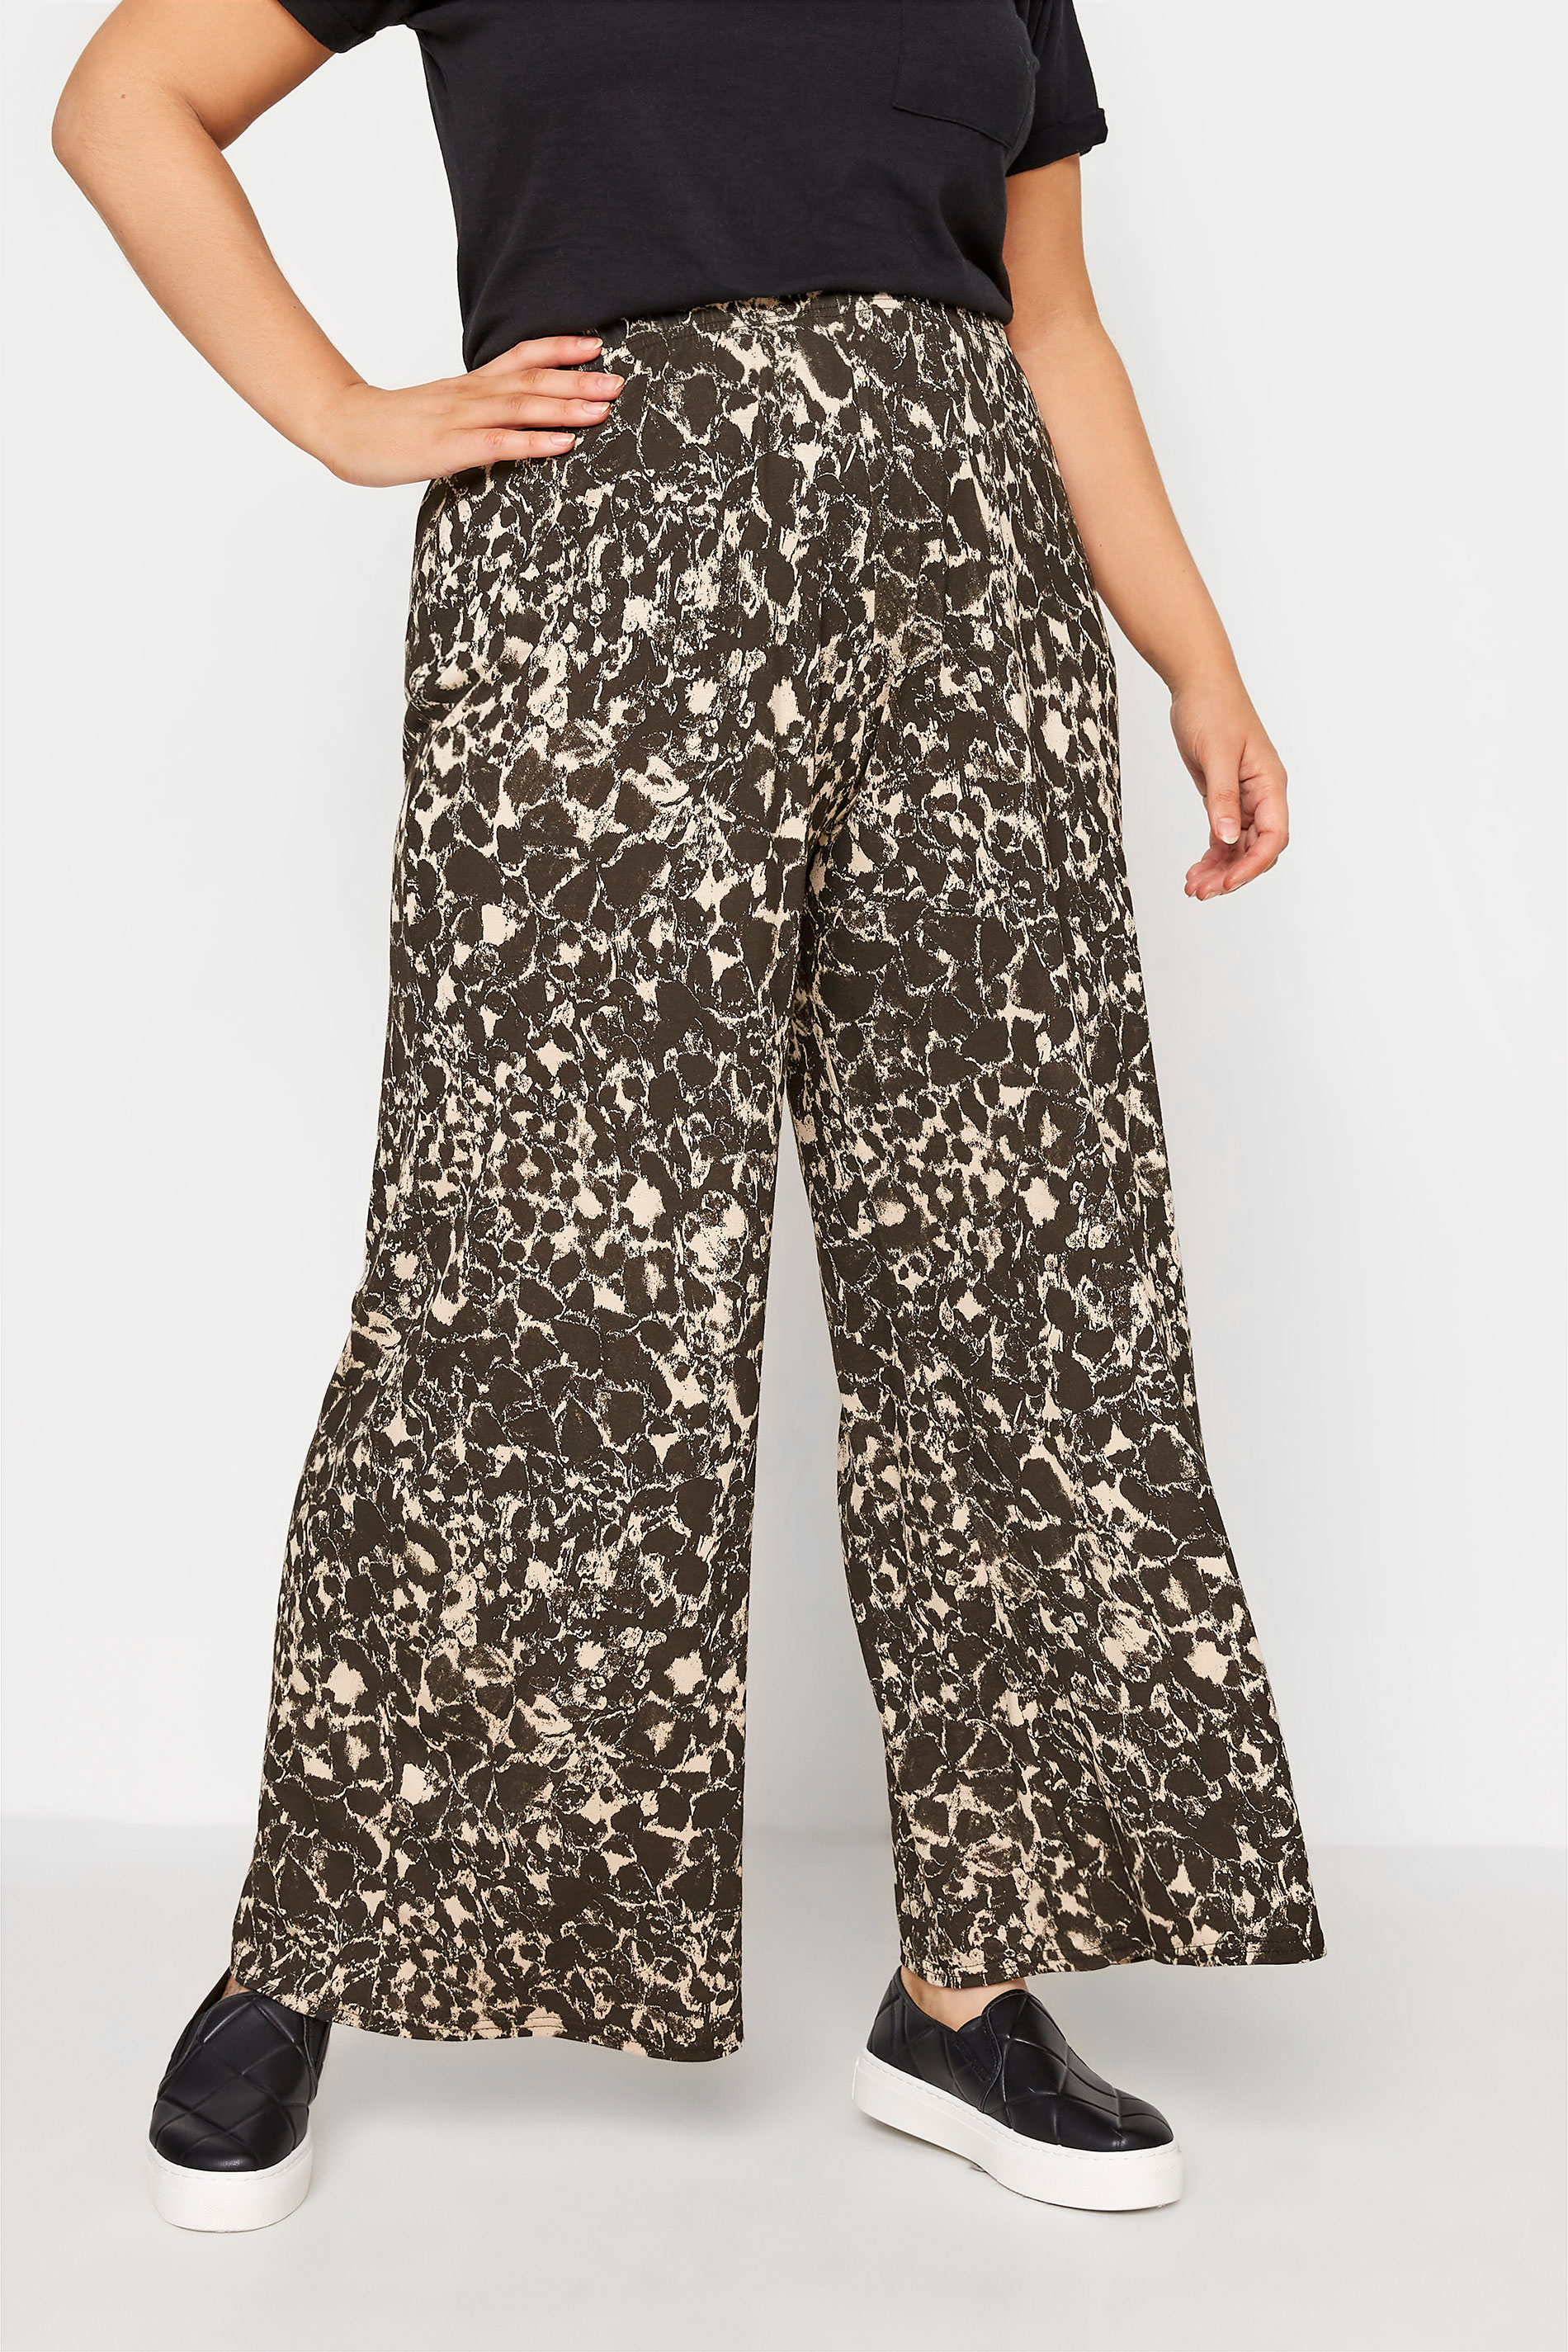 LIMITED COLLECTION Curve Black Leopard Print Wide Leg Trousers_A.jpg